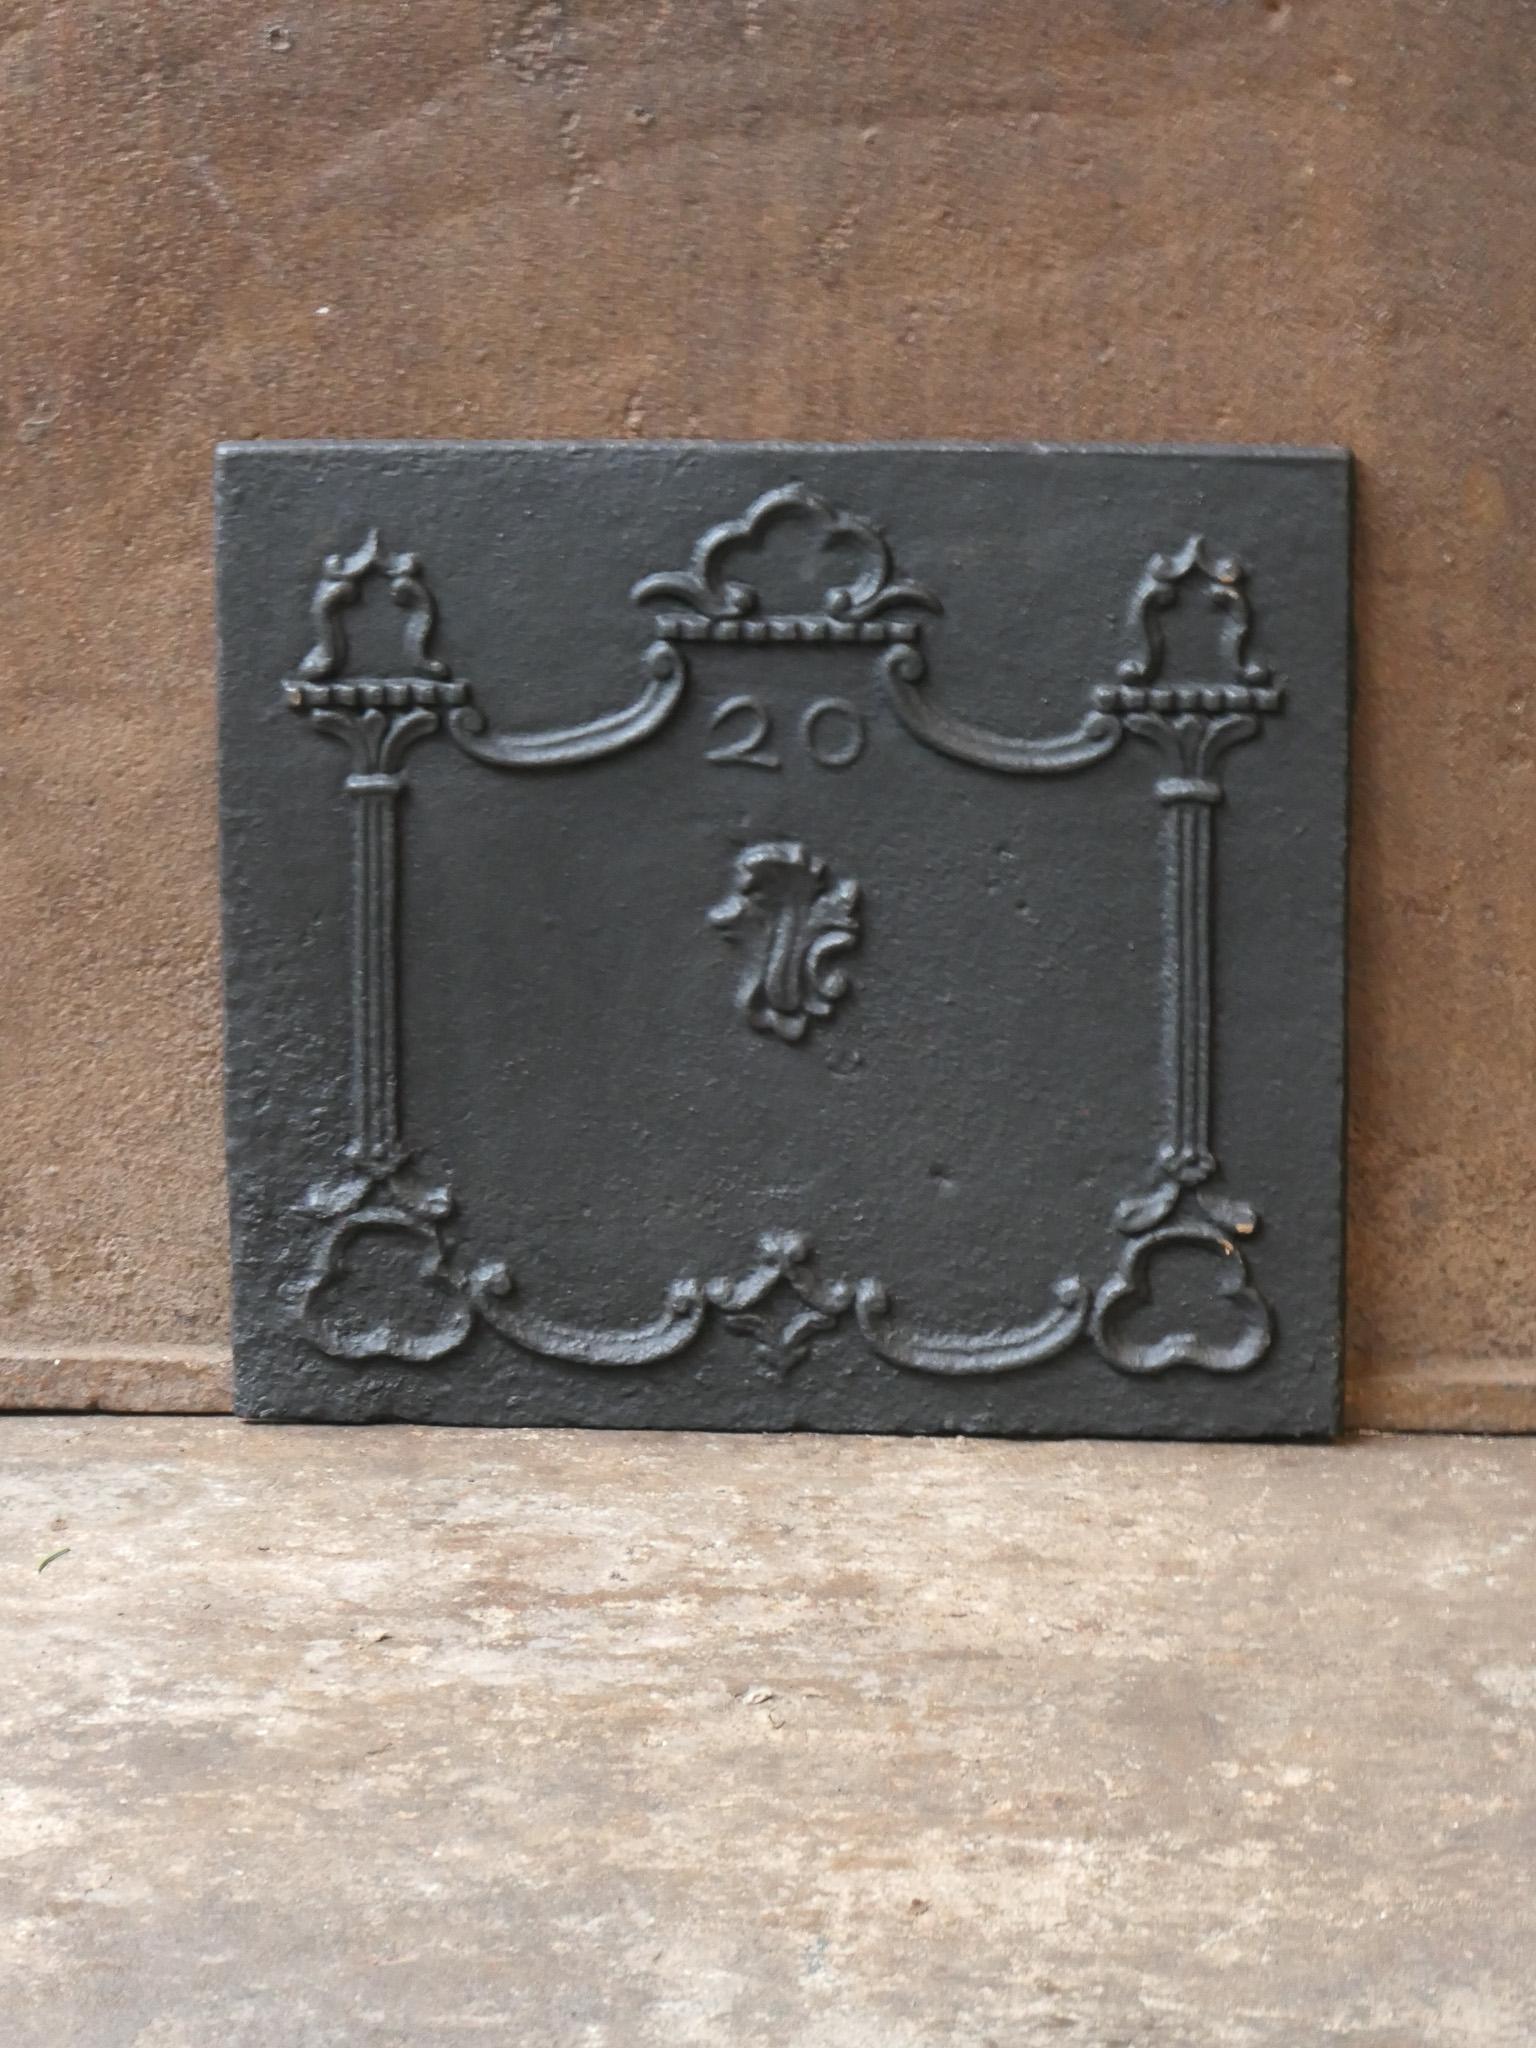 Small and elegant 18th century French Louis XV fireback.

The fireback is made of cast iron and has a black / pewter patina. The condition is good. It does not have cracks.